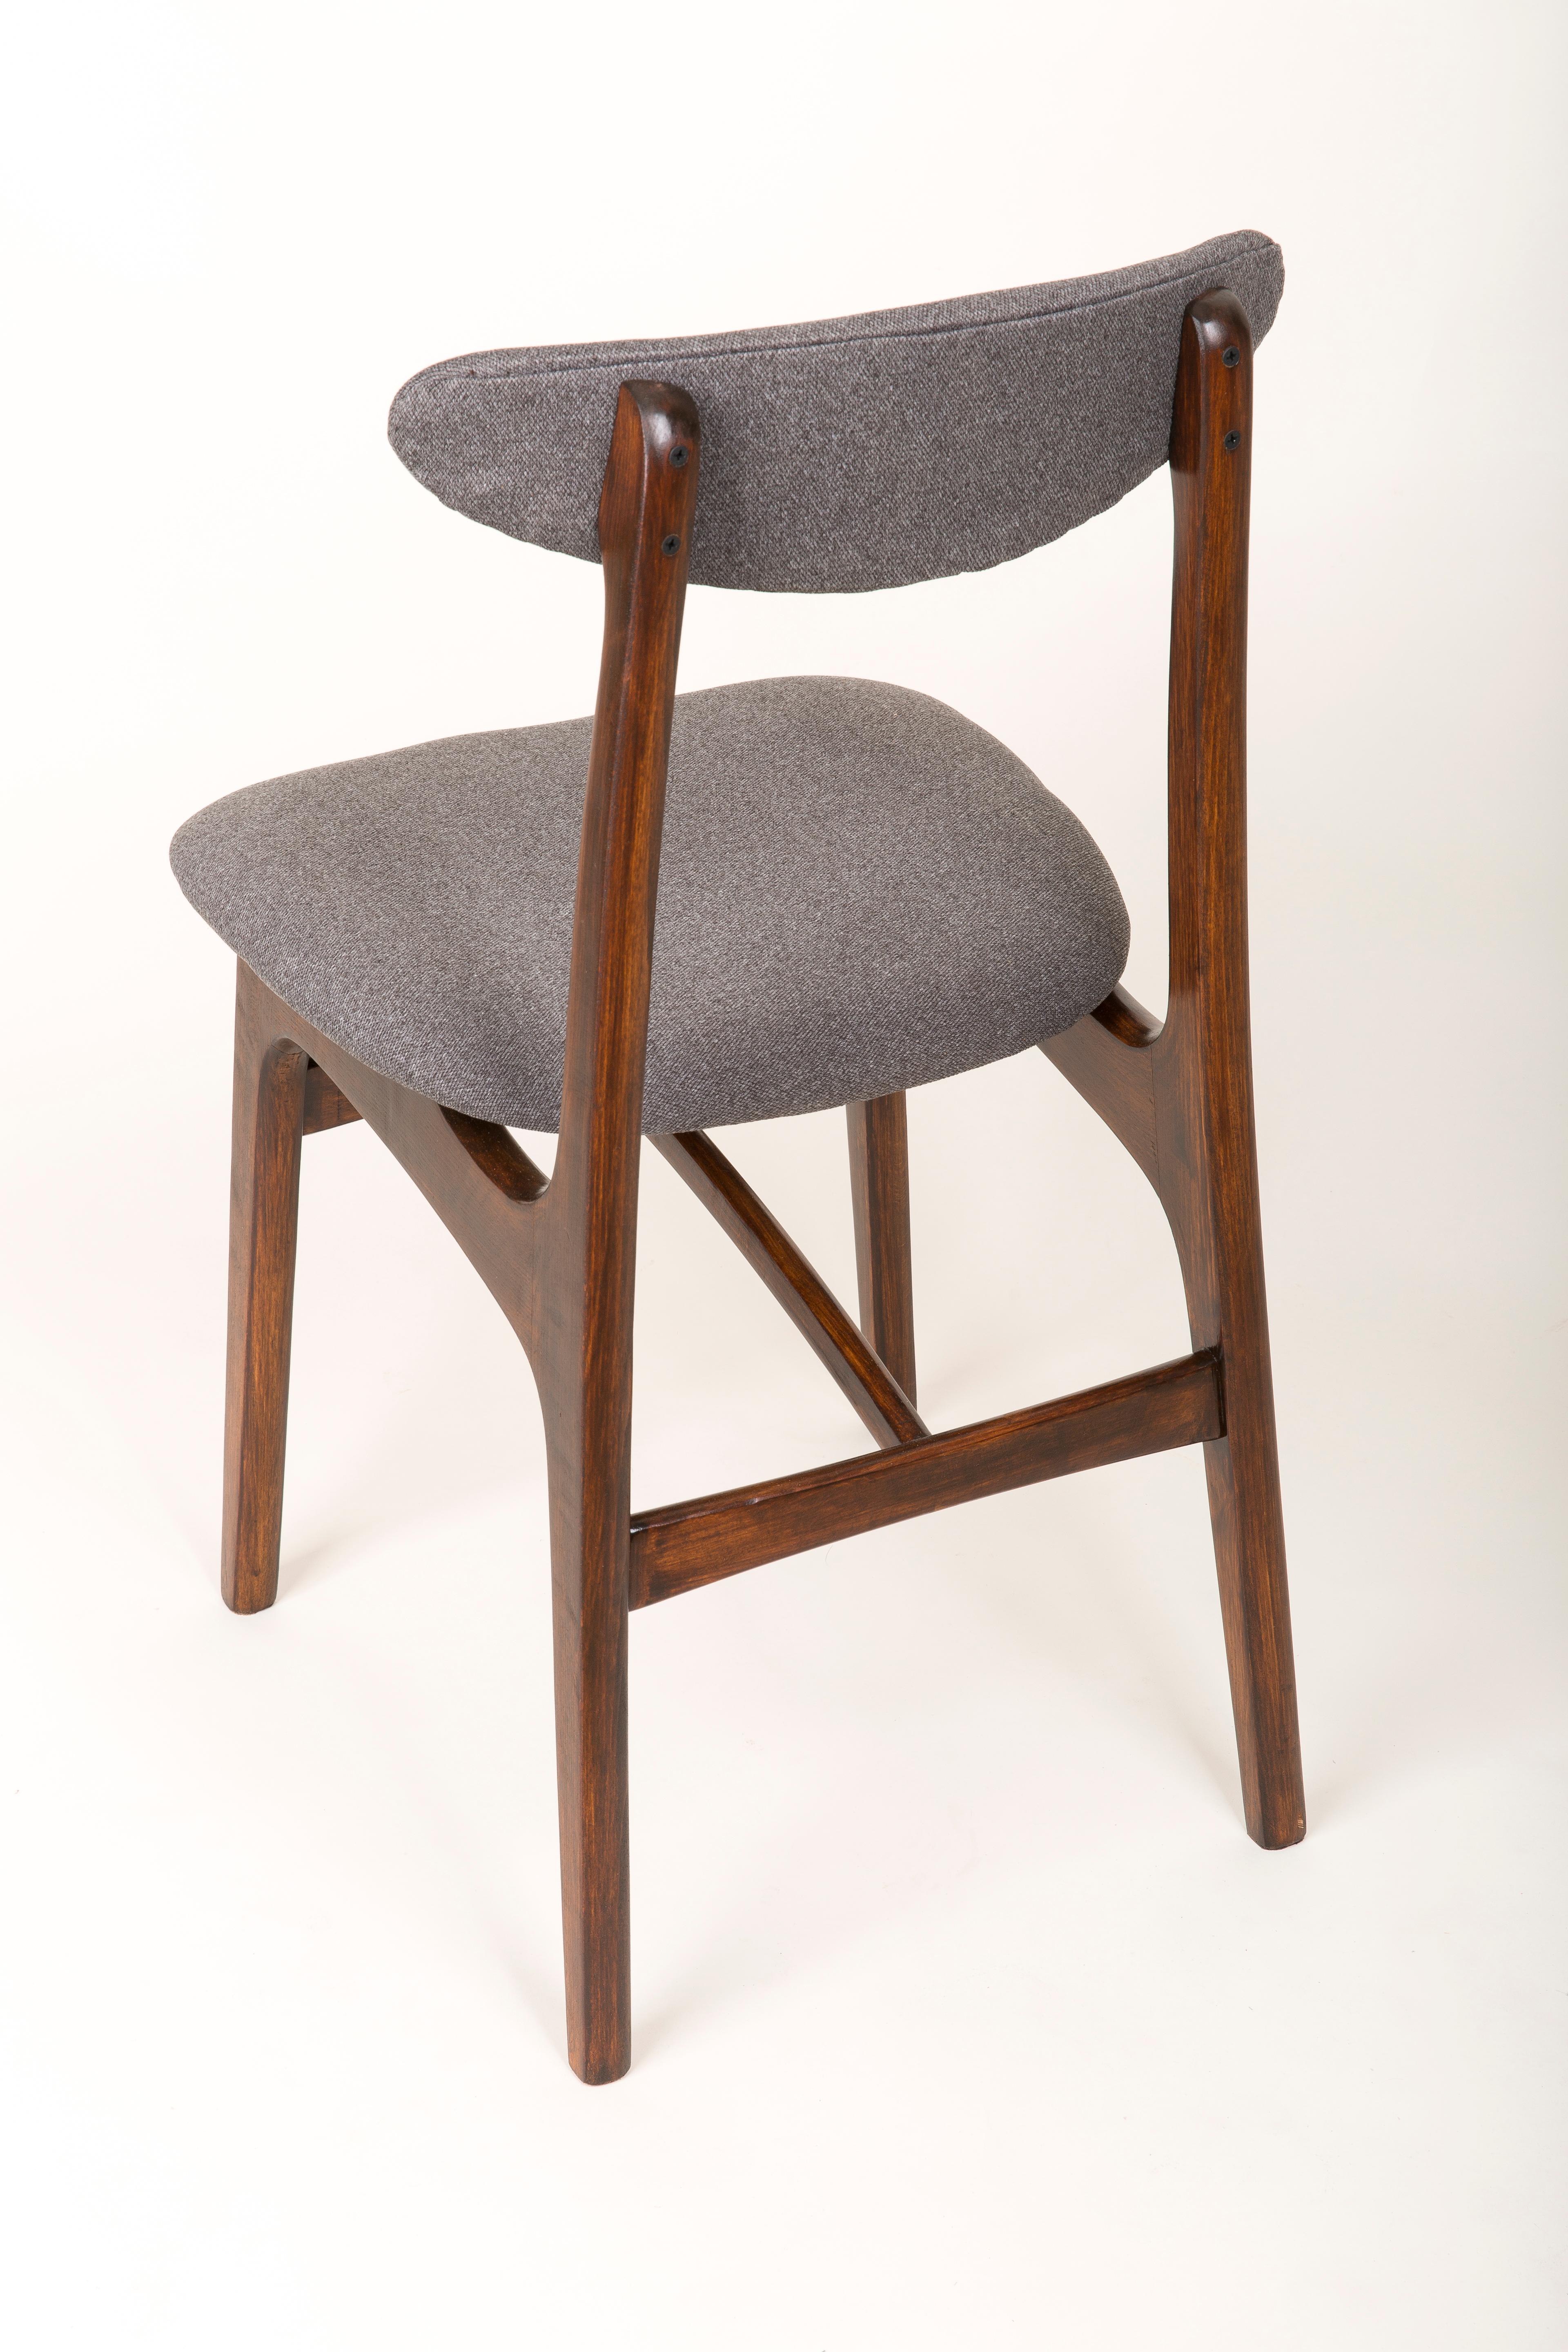 Set of Four 20th Century Gray Chairs by Rajmund Halas, 1960s For Sale 2